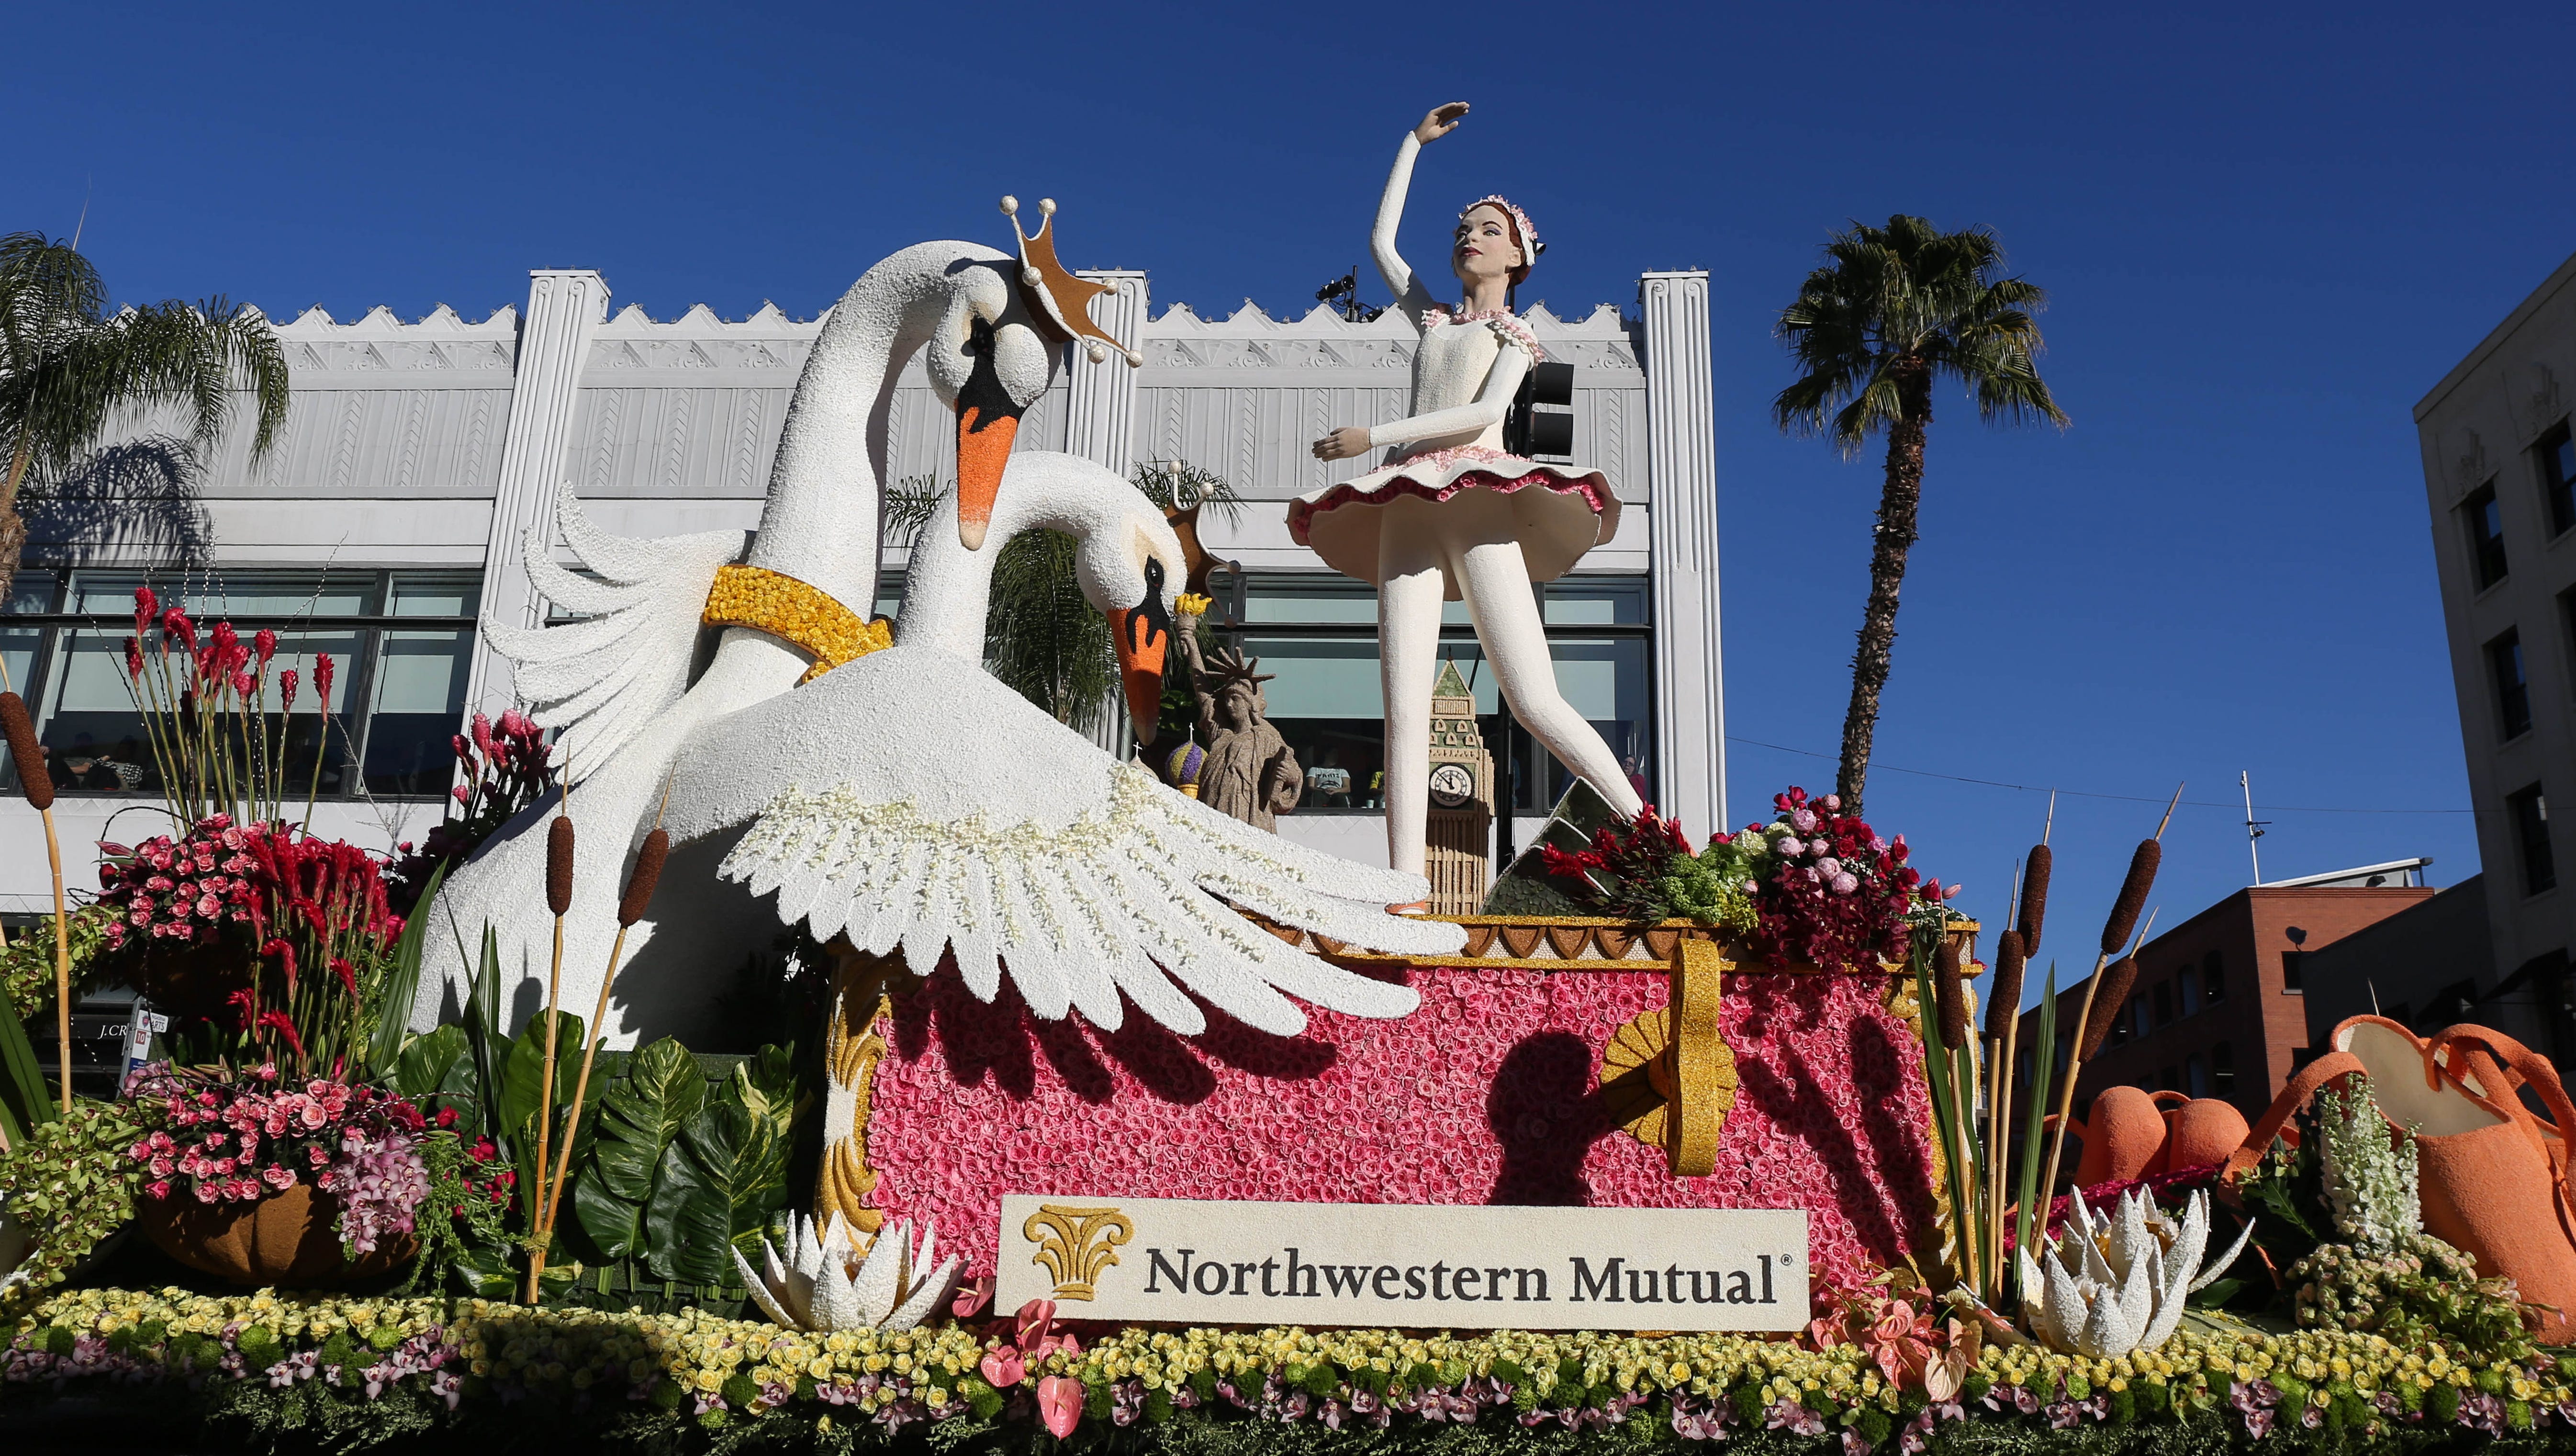 A Northwestern Mutual float cruises down Colorado Blvd. on Friday, Jan. 1, 2016, during the 2016 Tournament of Roses Parade in Pasadena, Calif.